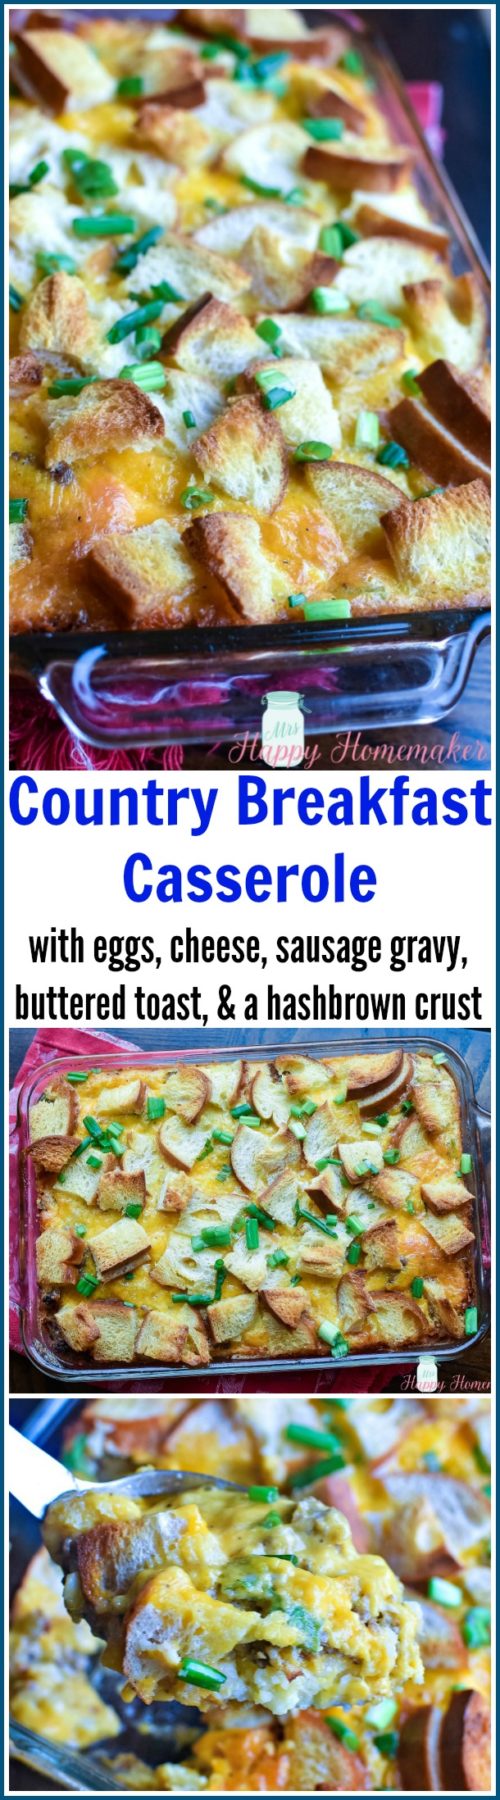 Country Breakfast Casserole with eggs, cheese, sausage gravy, buttered toast, and a hash brown crust